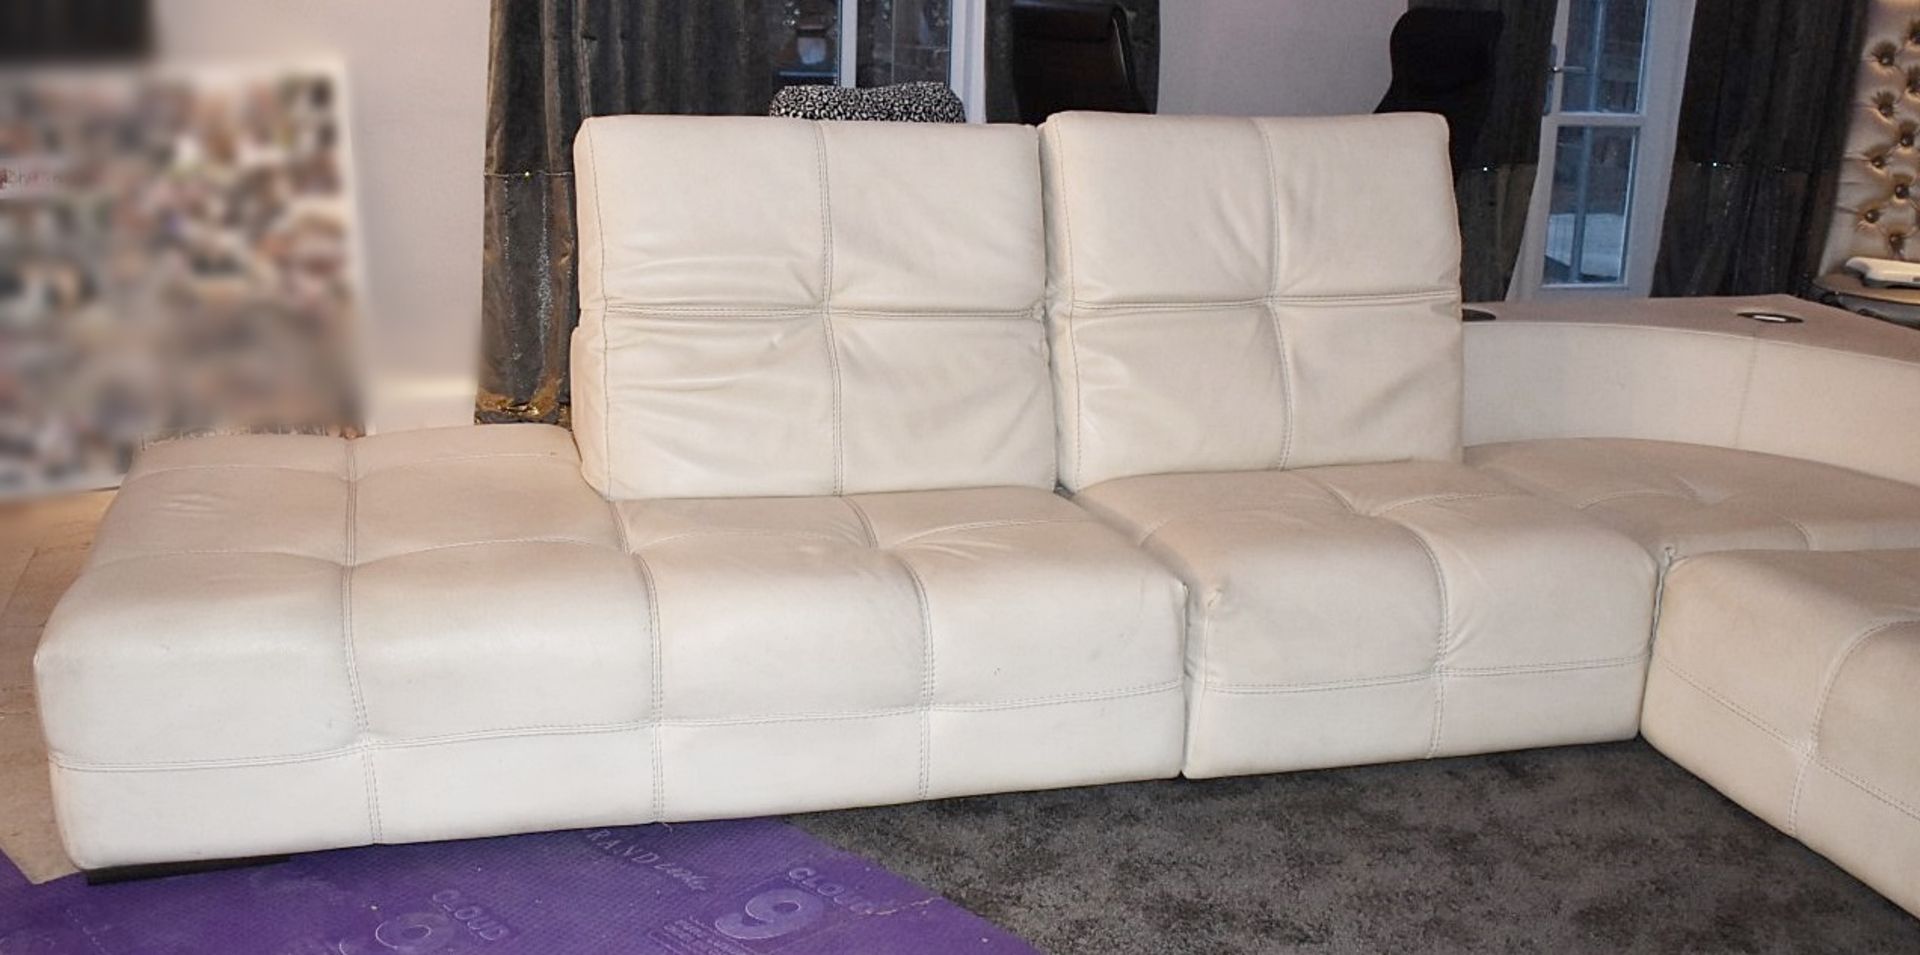 1 x NATUZZI Luxury White Leather Corner Sofa With Integrated Stereo Speakers And iPhone Dock - Cream - Image 2 of 13